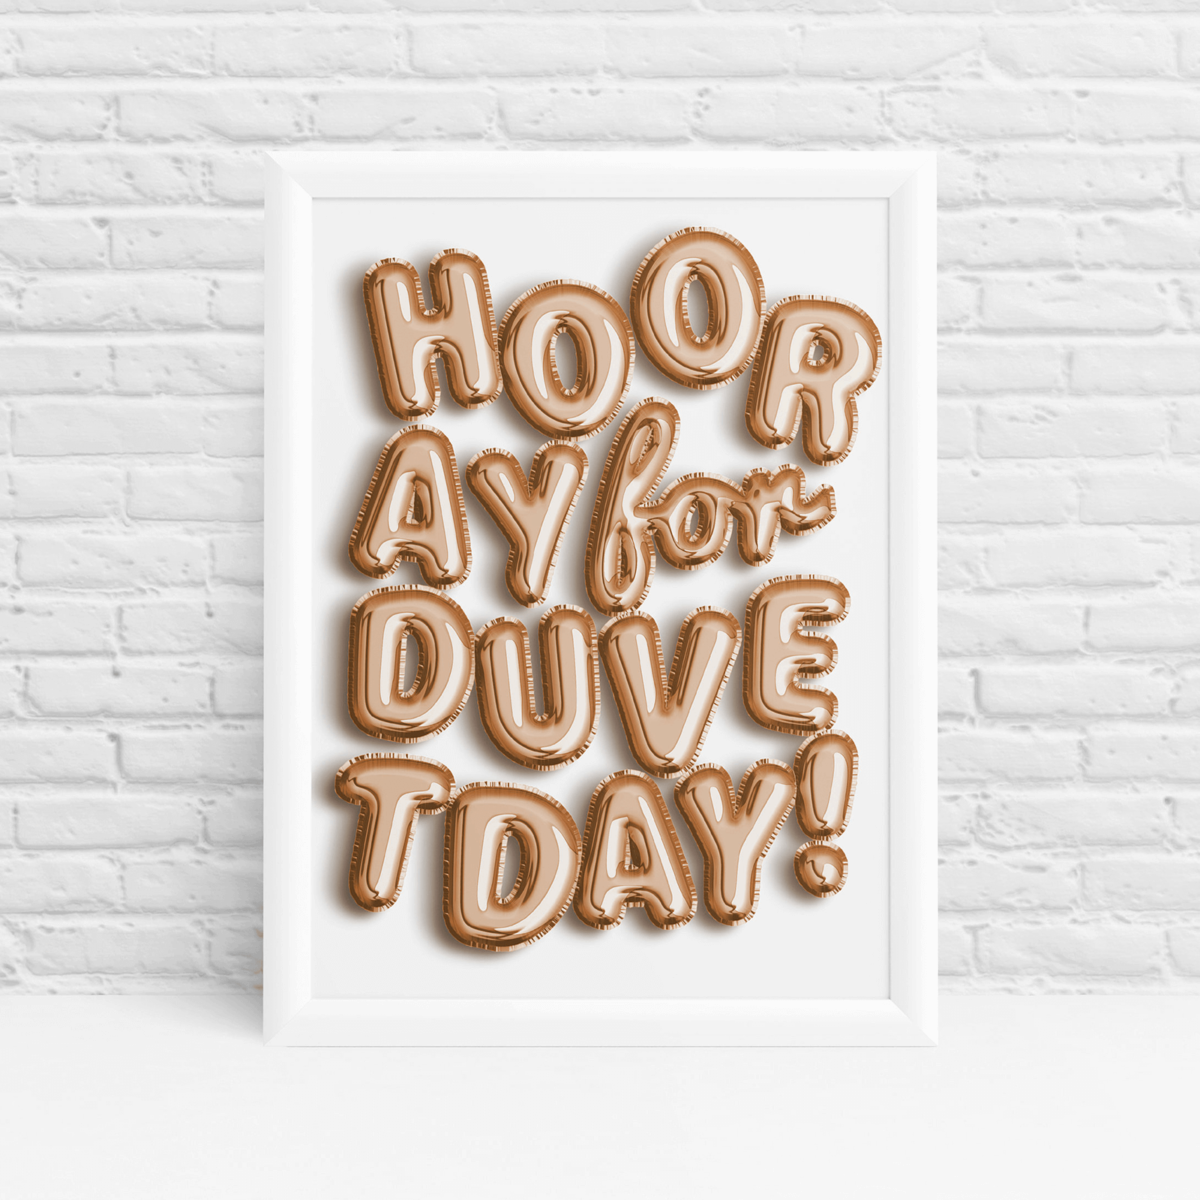 Rose gold helium balloon 'Hooray for duvet day' funny quote print by Ibbleobble®